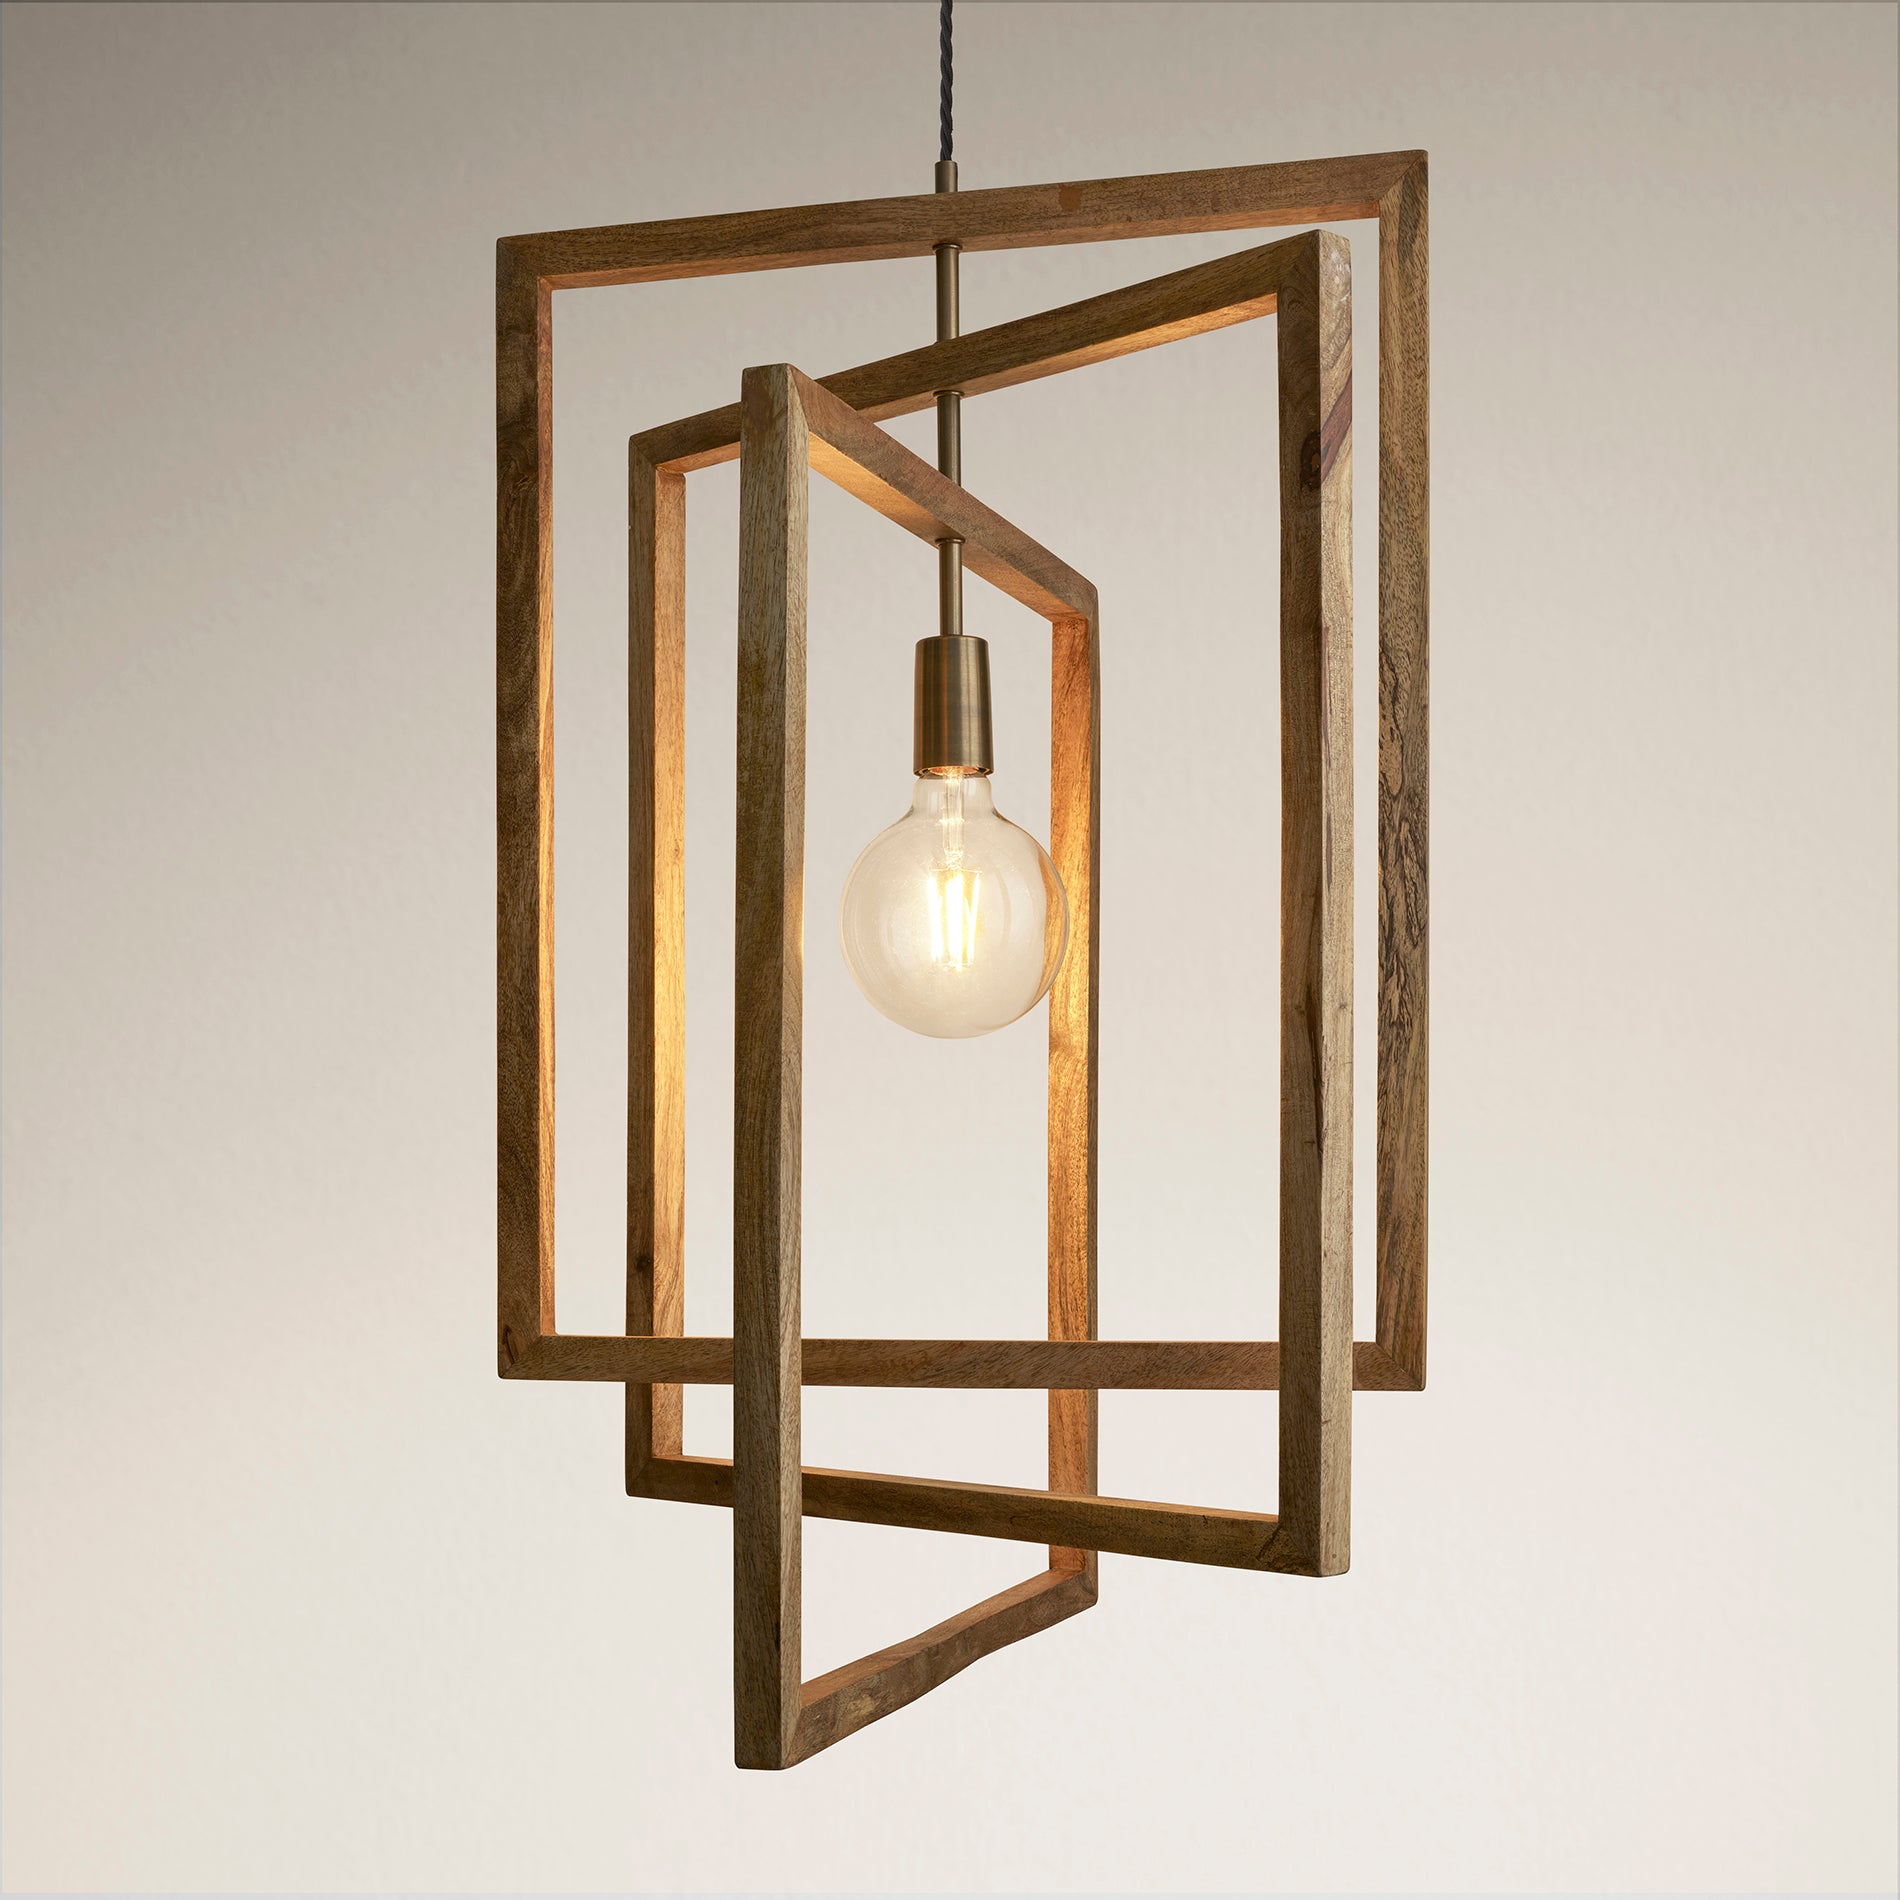 Wooden Geometric Ceiling Pendant Light - 20 inch - Rectangle - Natural